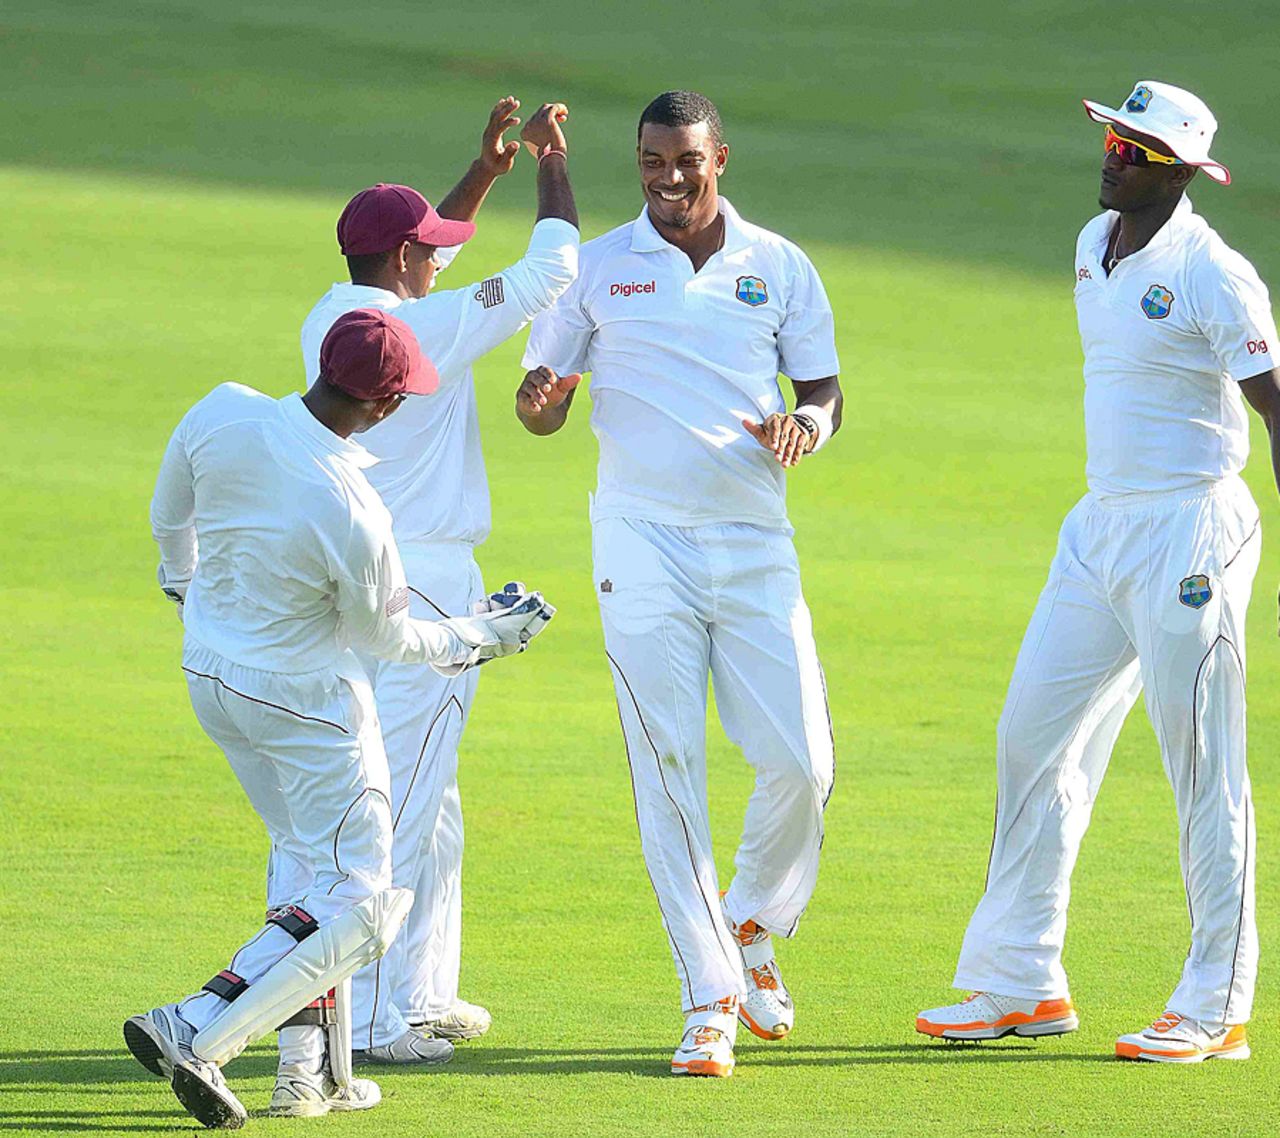 Shannon Gabriel is congratulated by his team-mates after taking a wicket, West Indies v Zimbabwe, 1st Test, Barbados, 2nd day, March 13, 2013